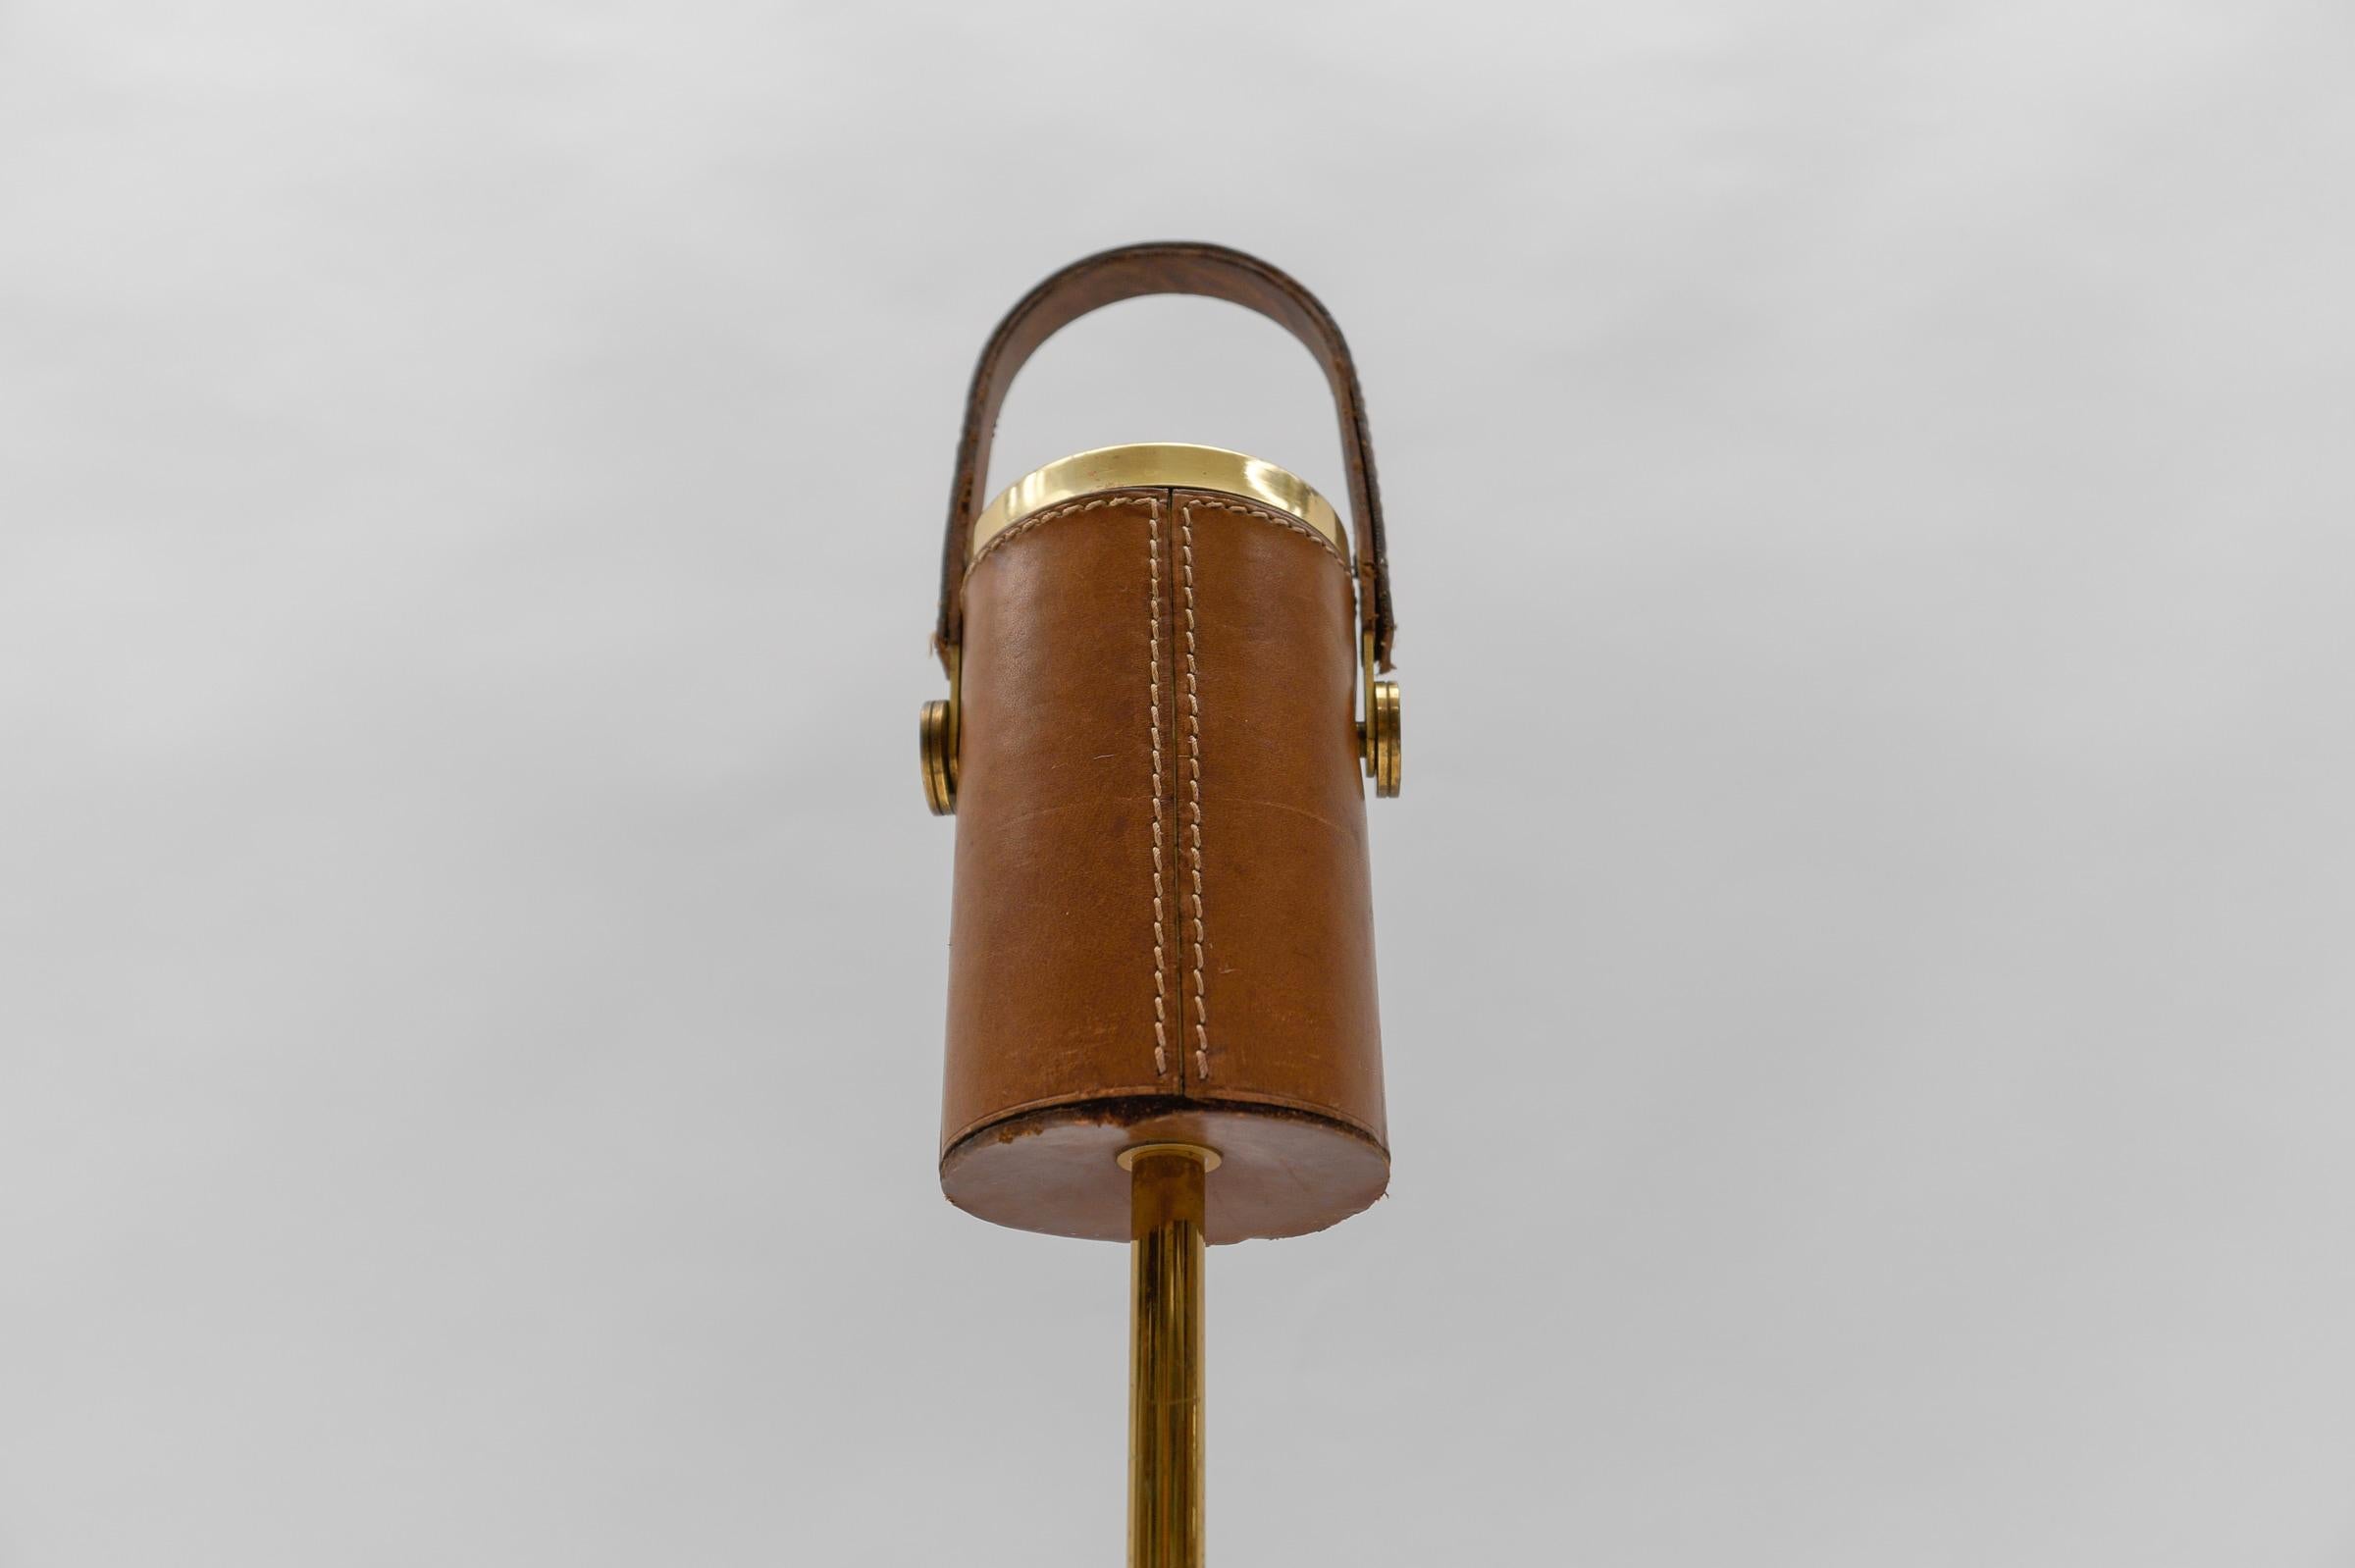 Mid-Century Modern Portable Ashtray Stand in the Manner of Jacques Adnet, Brass and Leather, 1950s For Sale